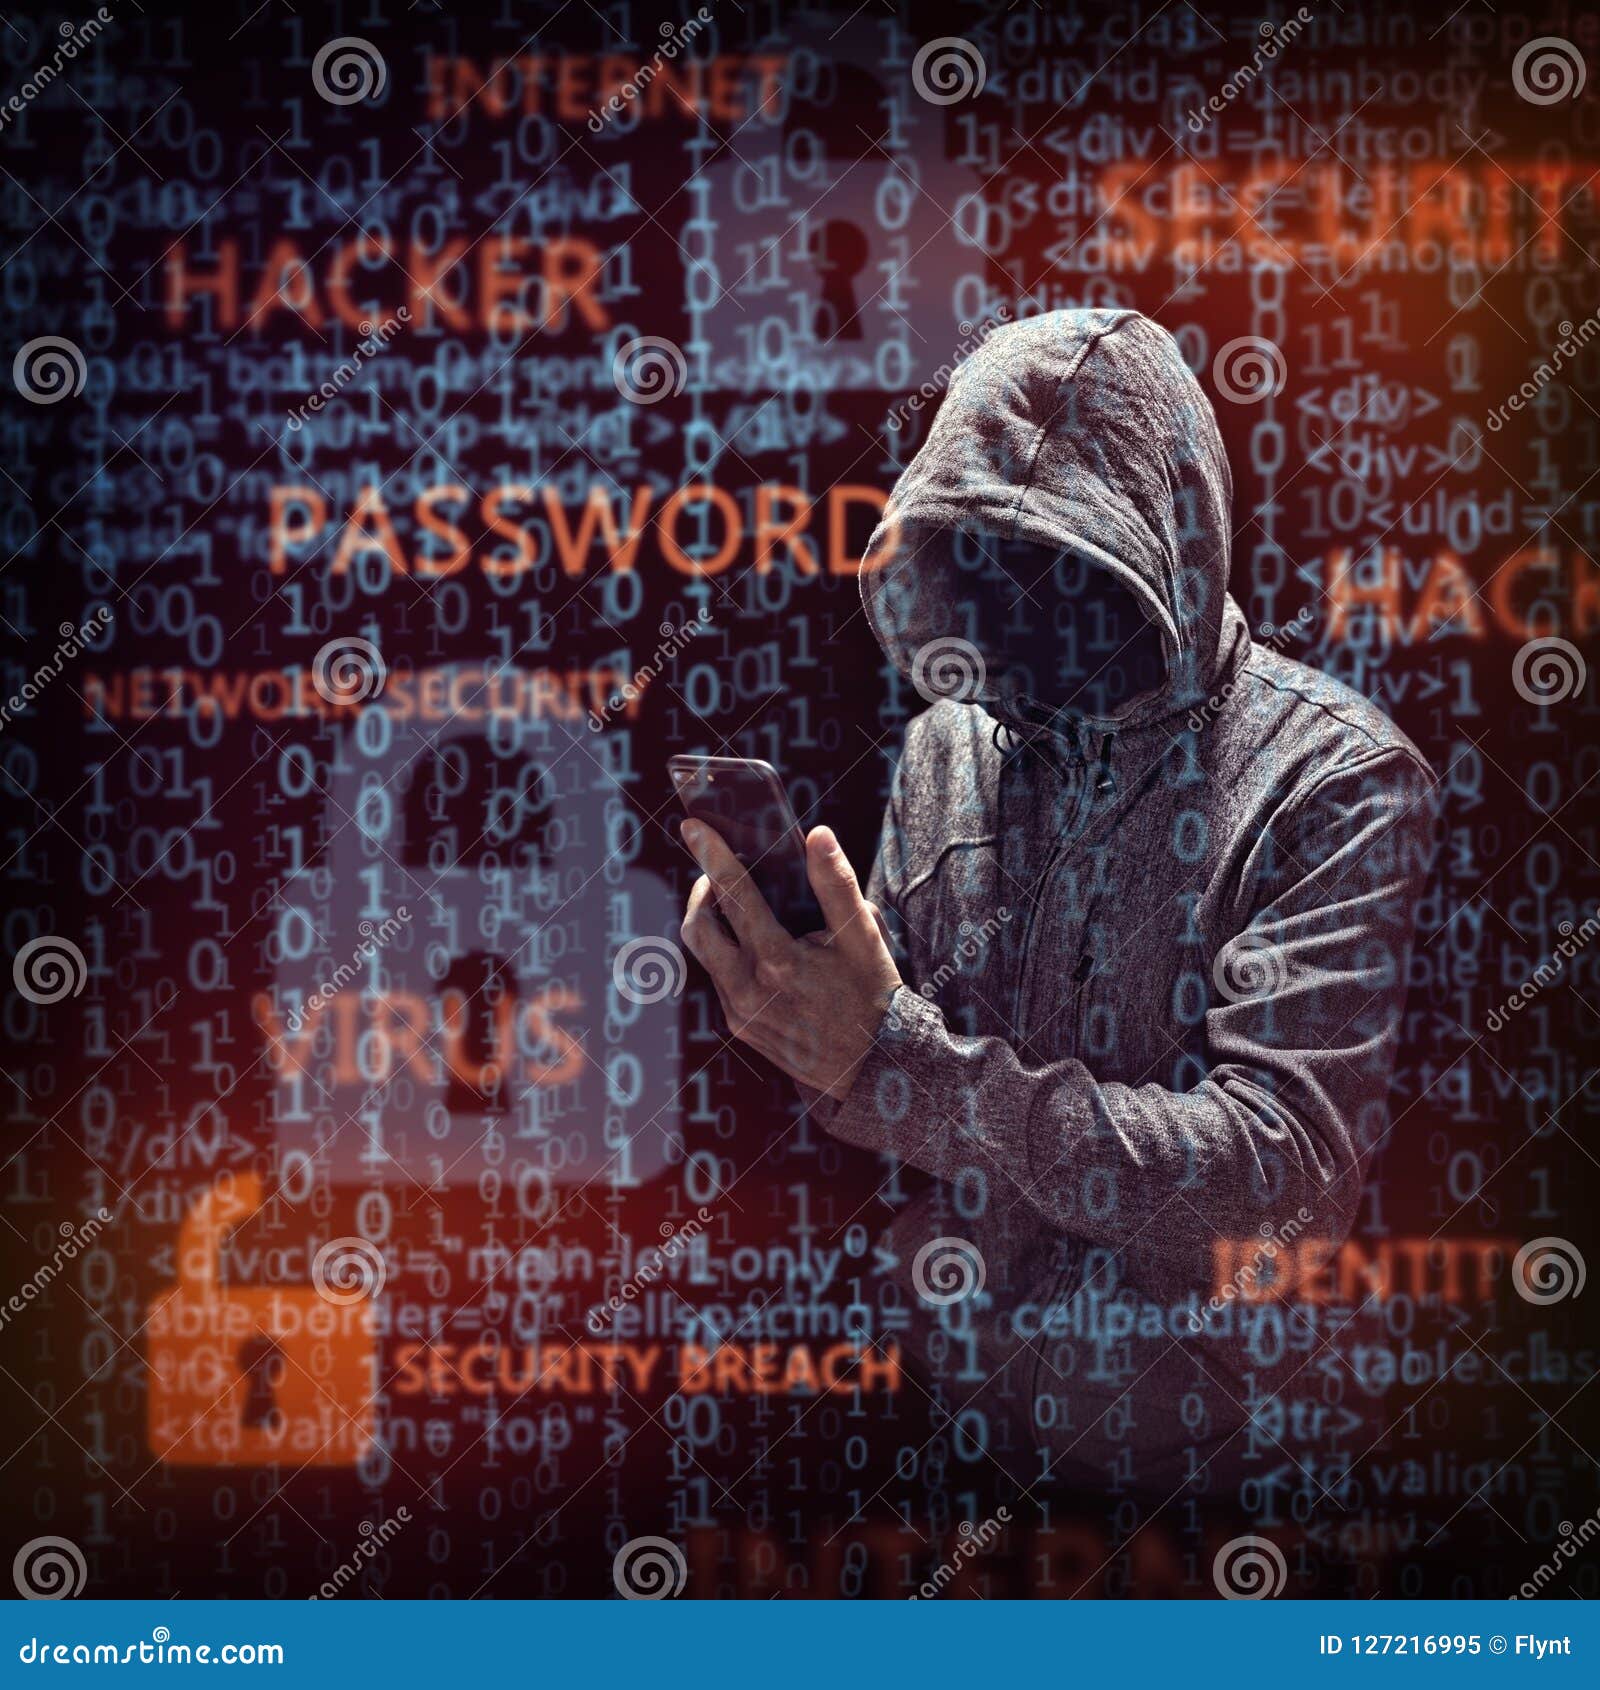 computer hacker with mobile phone